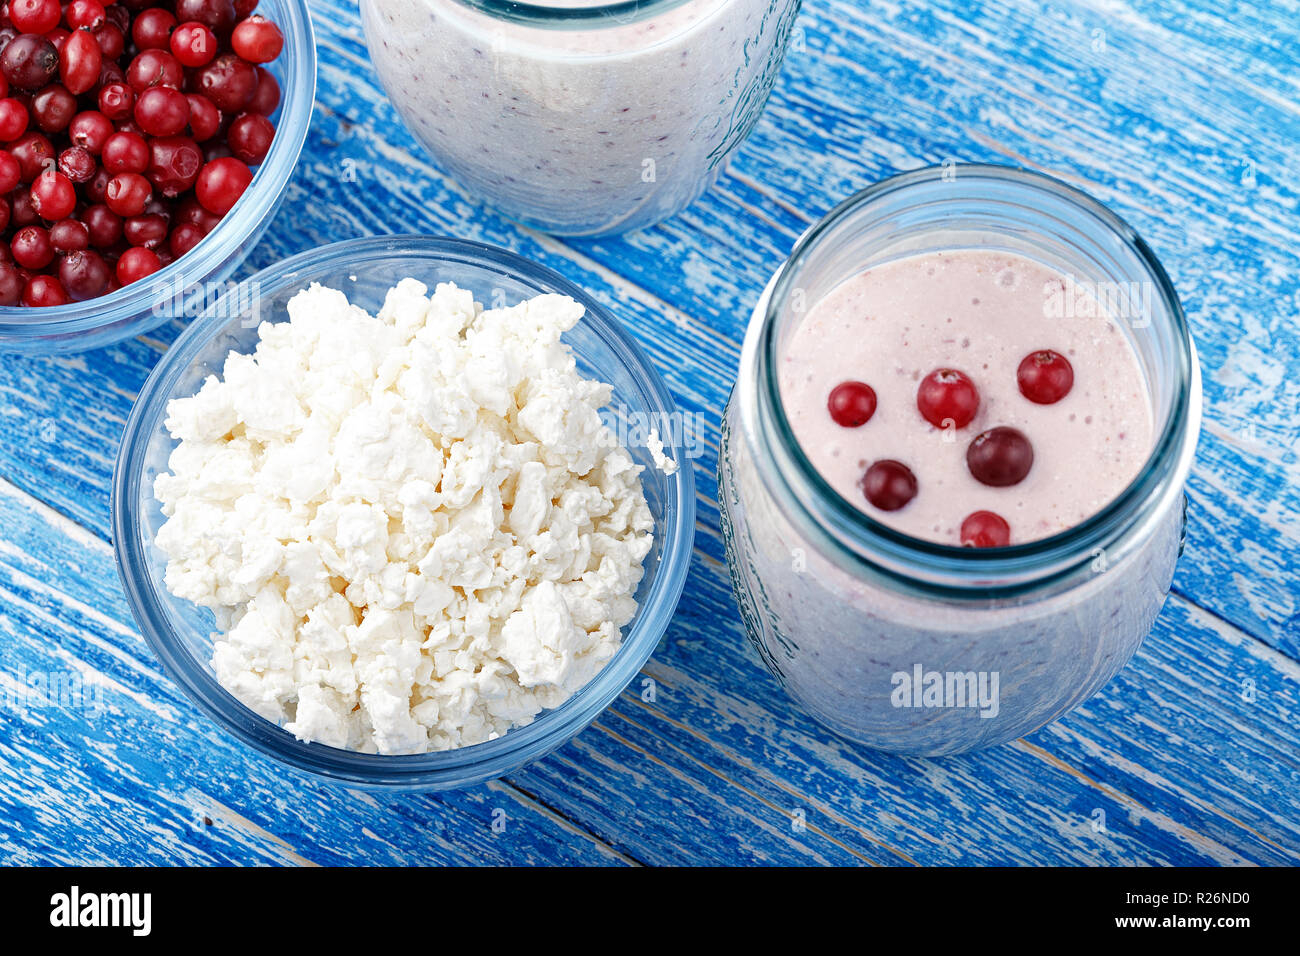 Healthy Nutritious Breakfast With Milk Cottage Cheese And